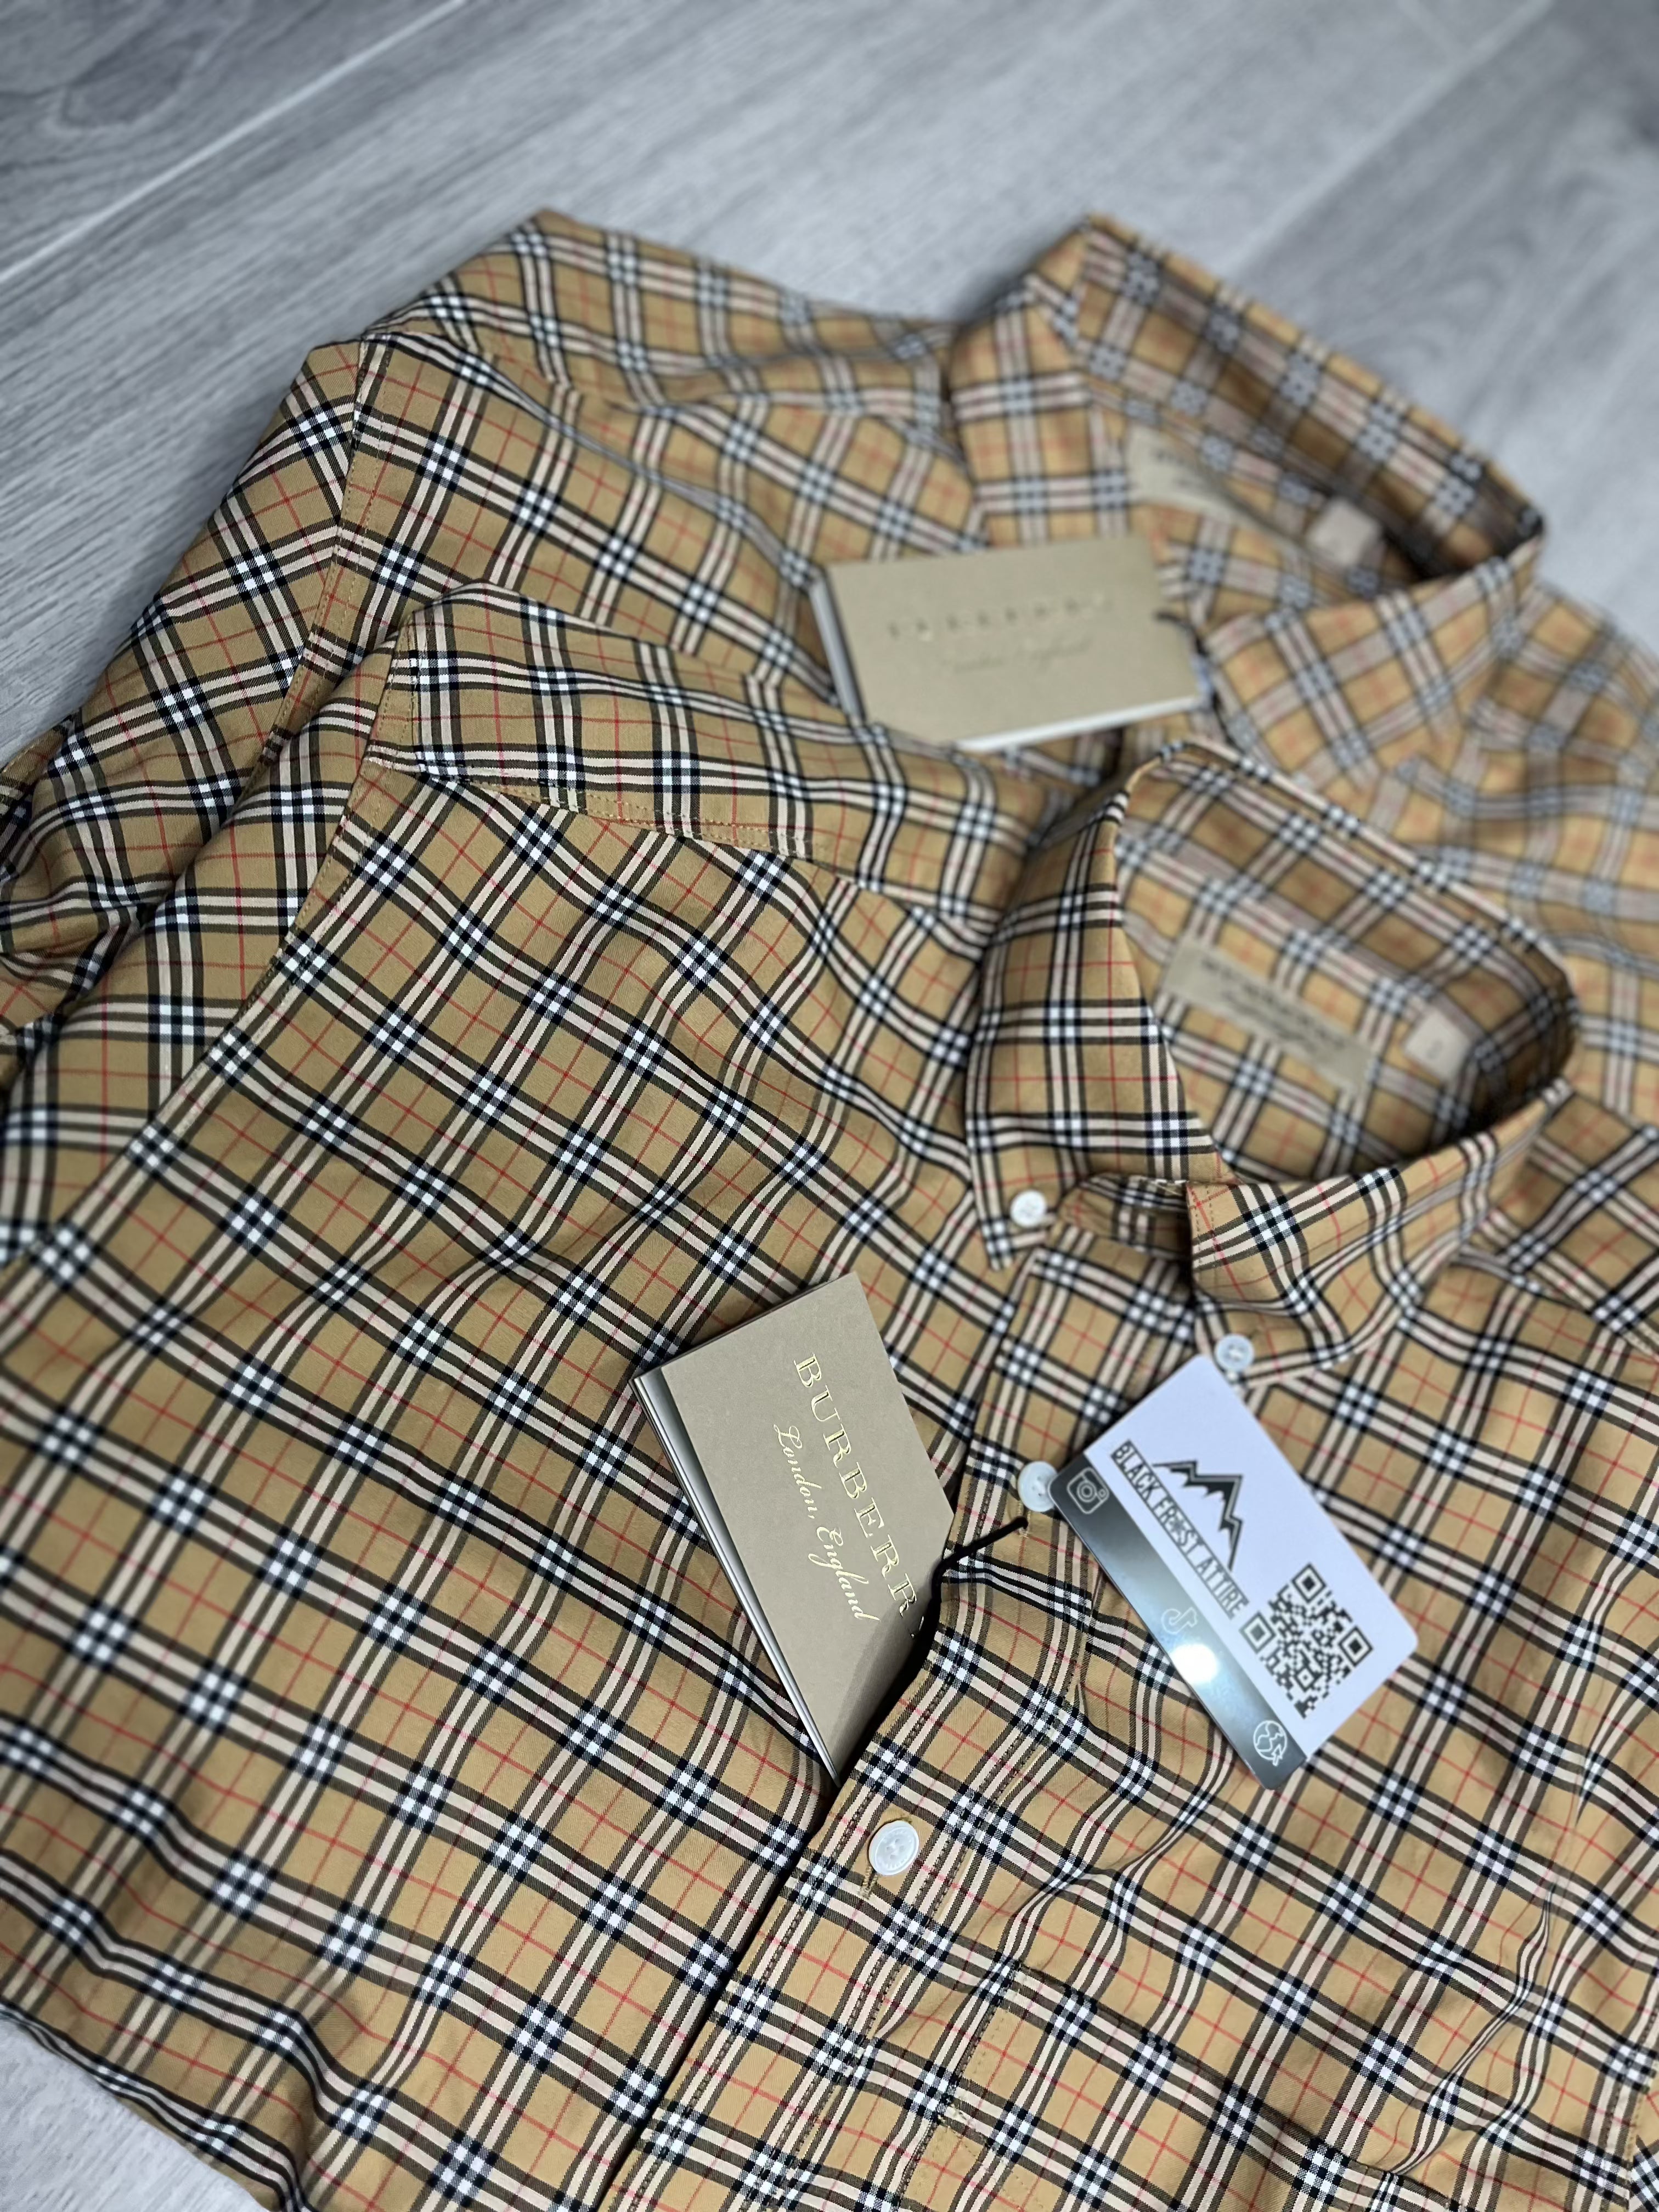 Burberry Shirt Mens, Two Beige Checked Shirts